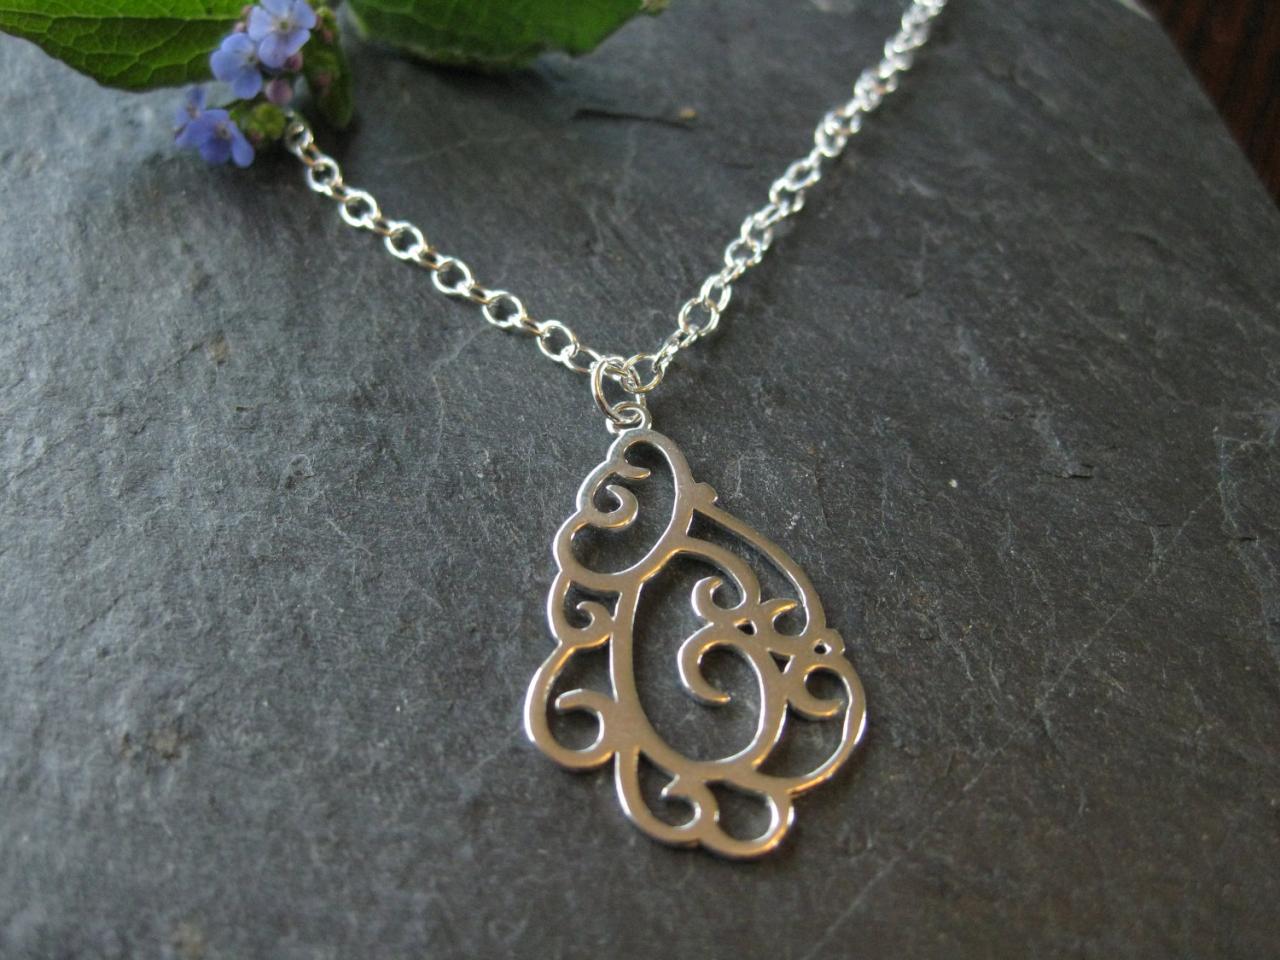 Sterling Swirly Pendant Necklace, Silver Oval Link Chain